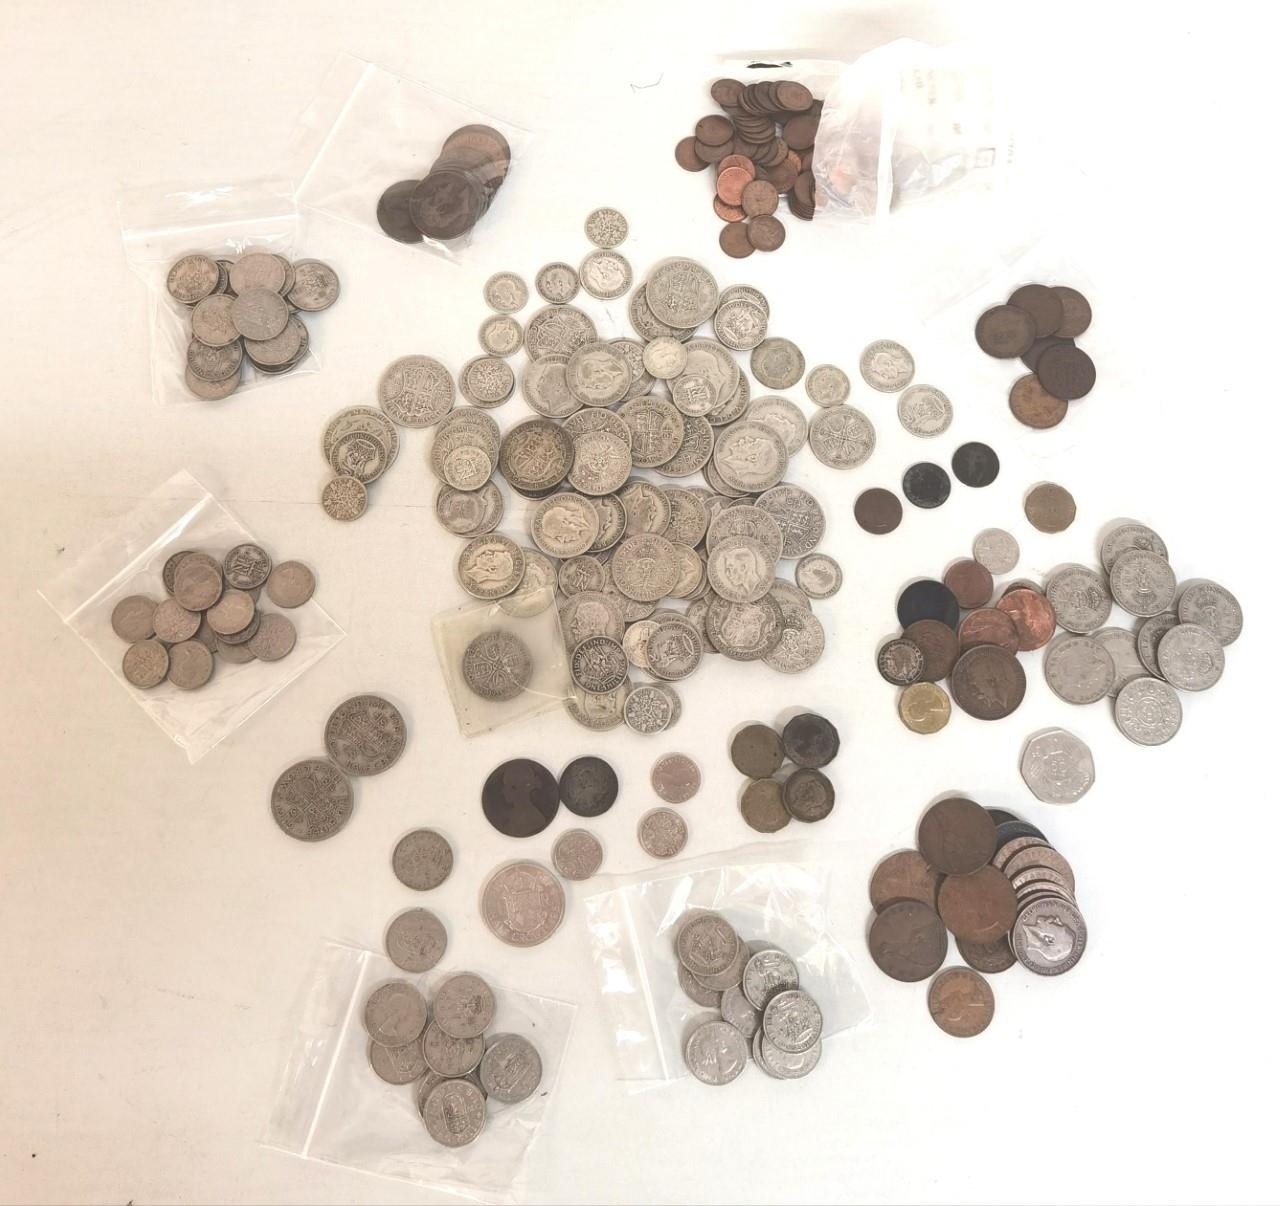 A large quantity of early to mid 20th century British Coinage to include half crowns, florins